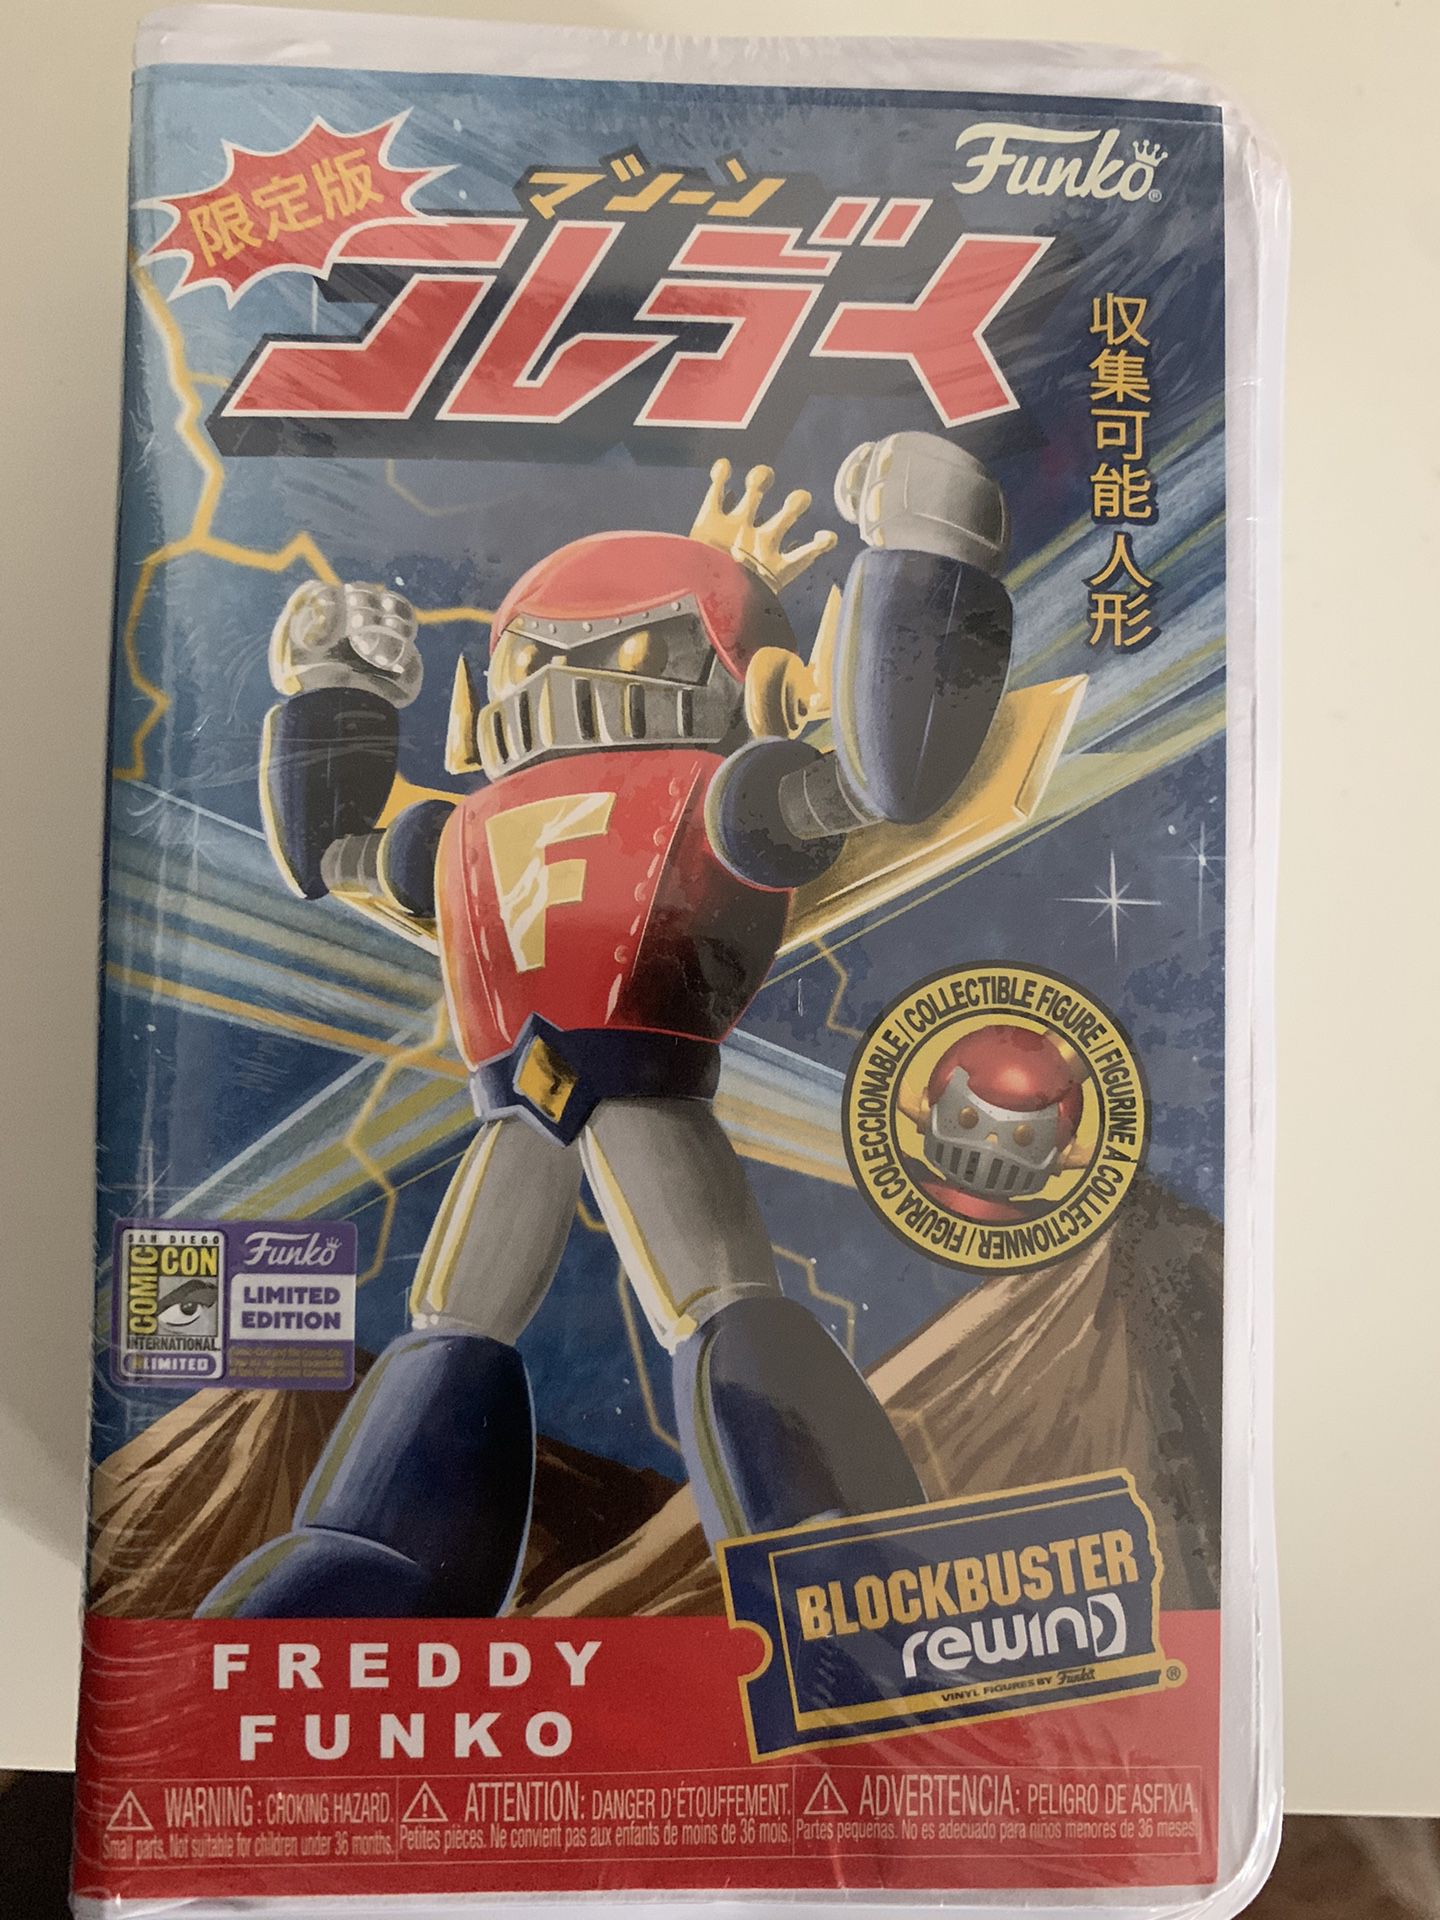 Freddy Funko Mazinger Block Buster Rewind for Sale in Lincoln Acres, CA -  OfferUp